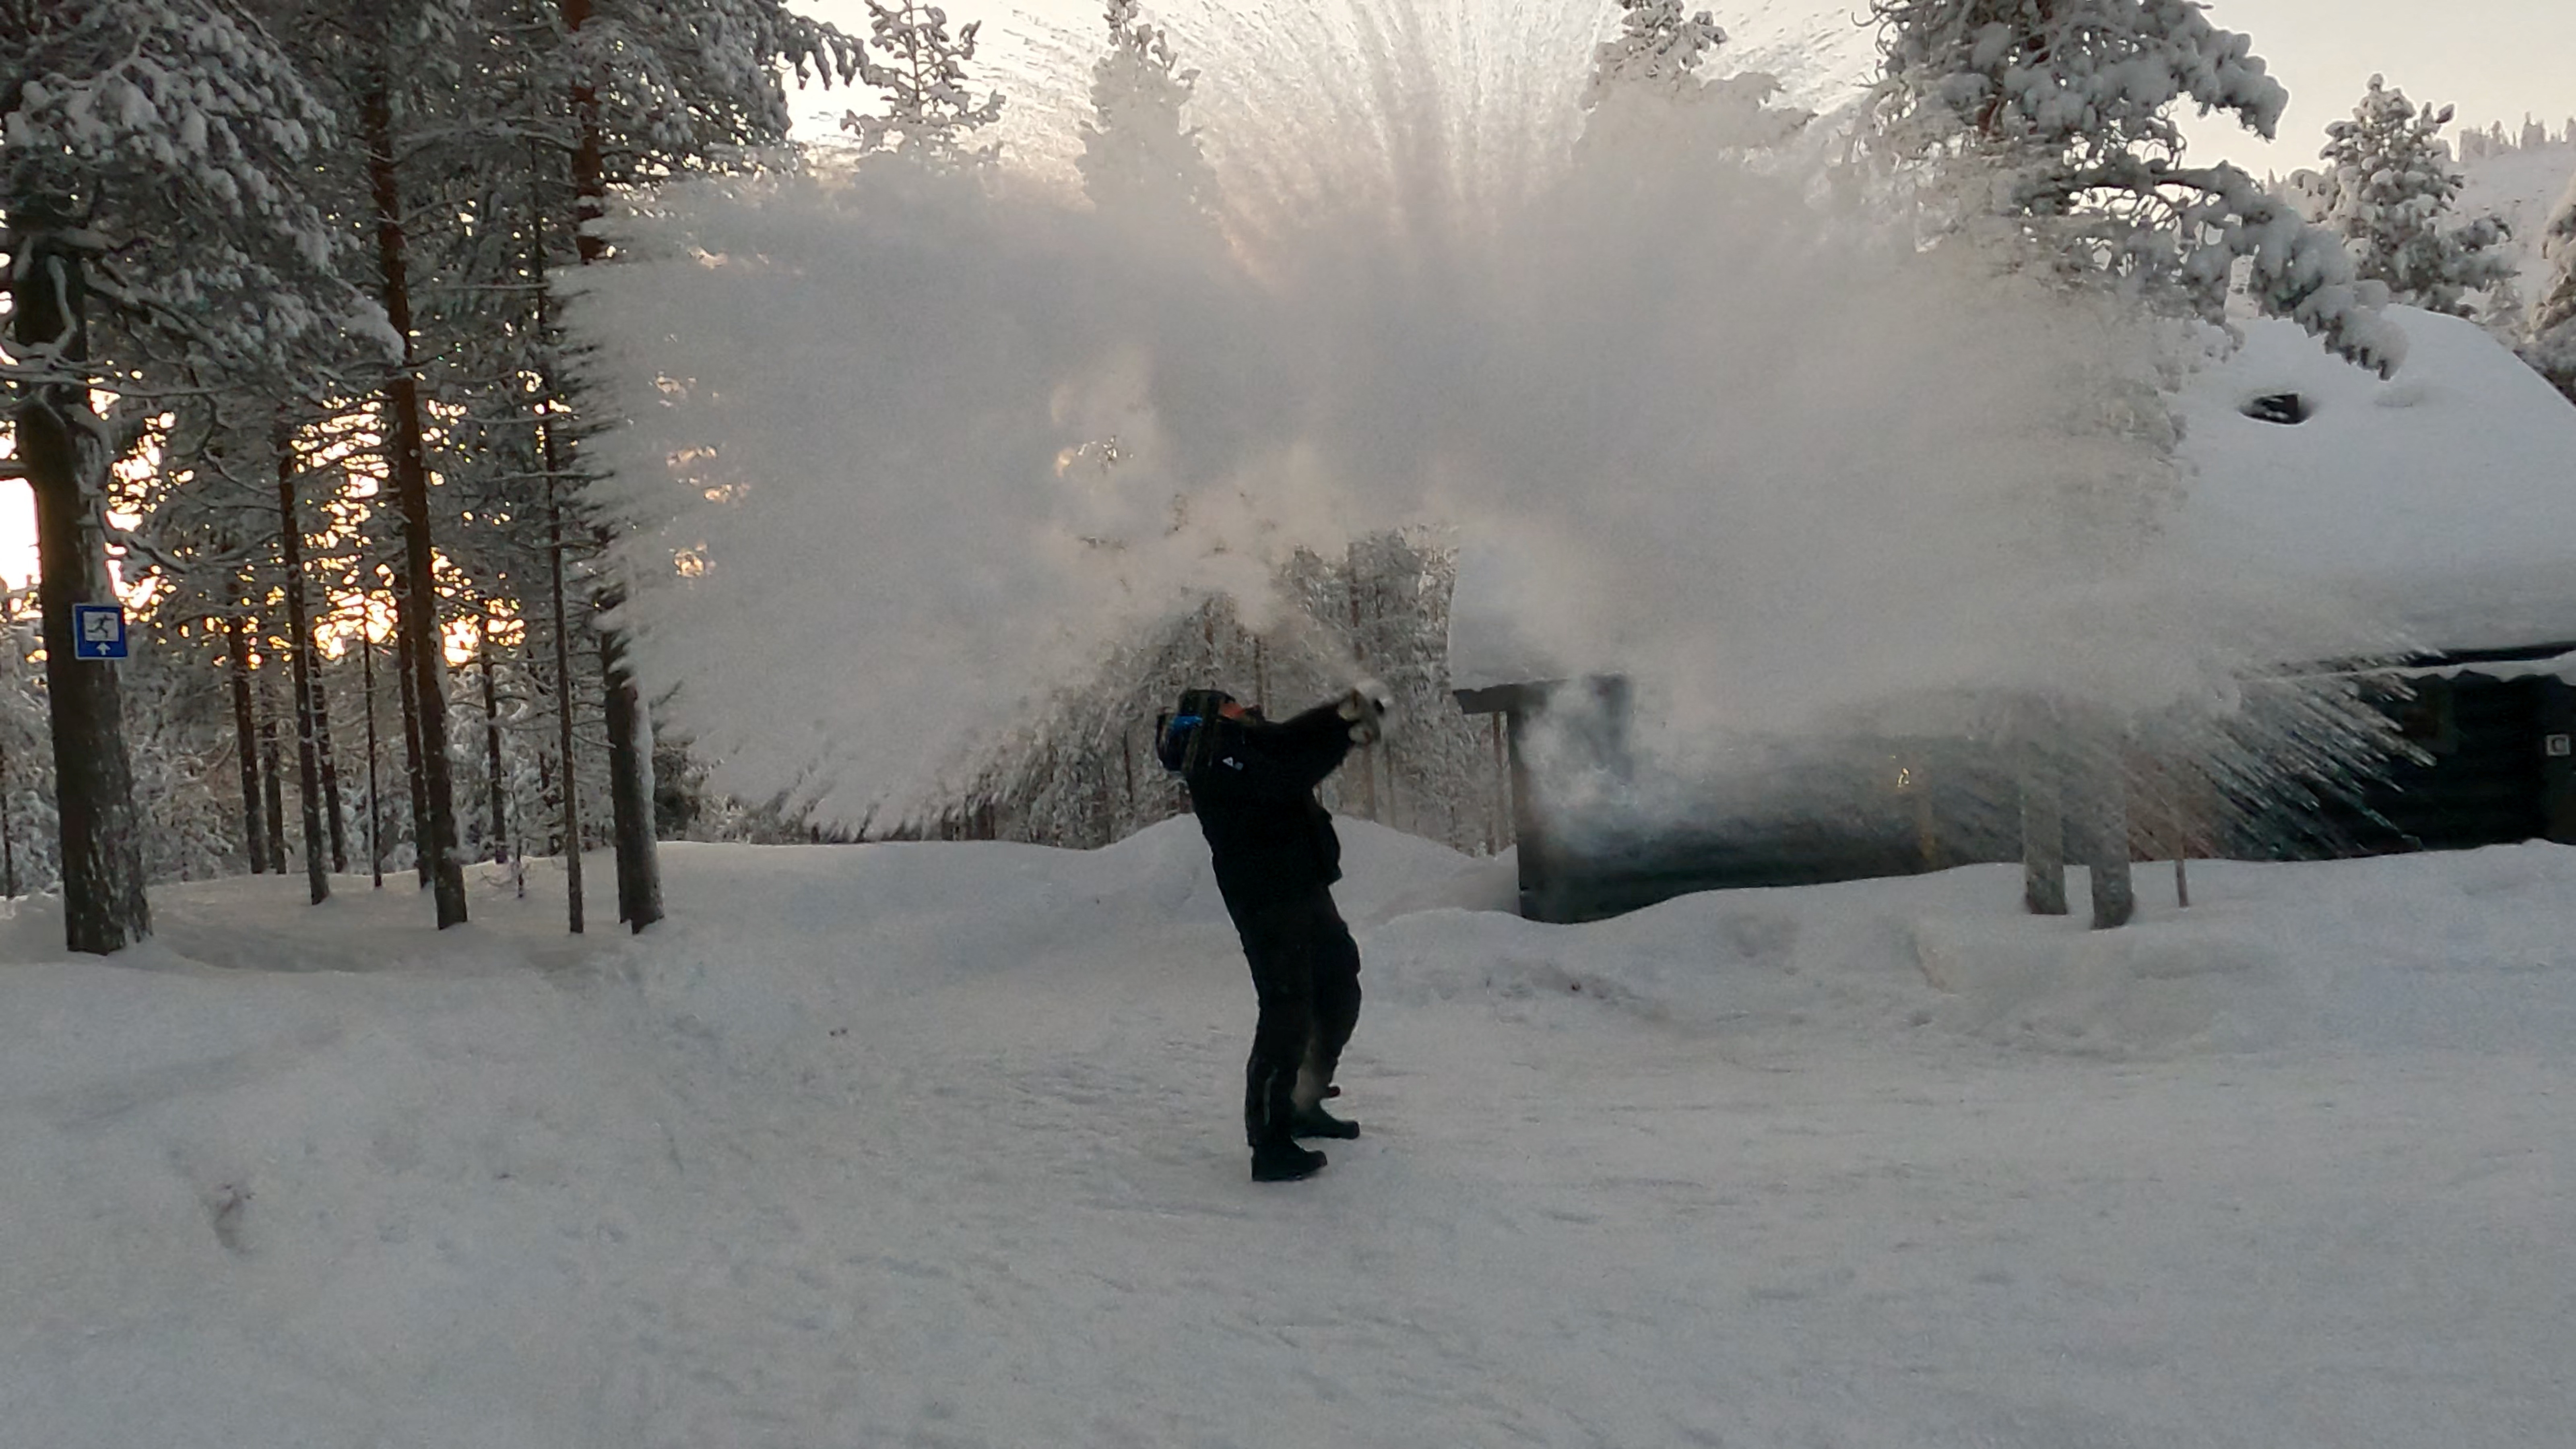 Finland's extreme cold freezes even boiling water thrown in the